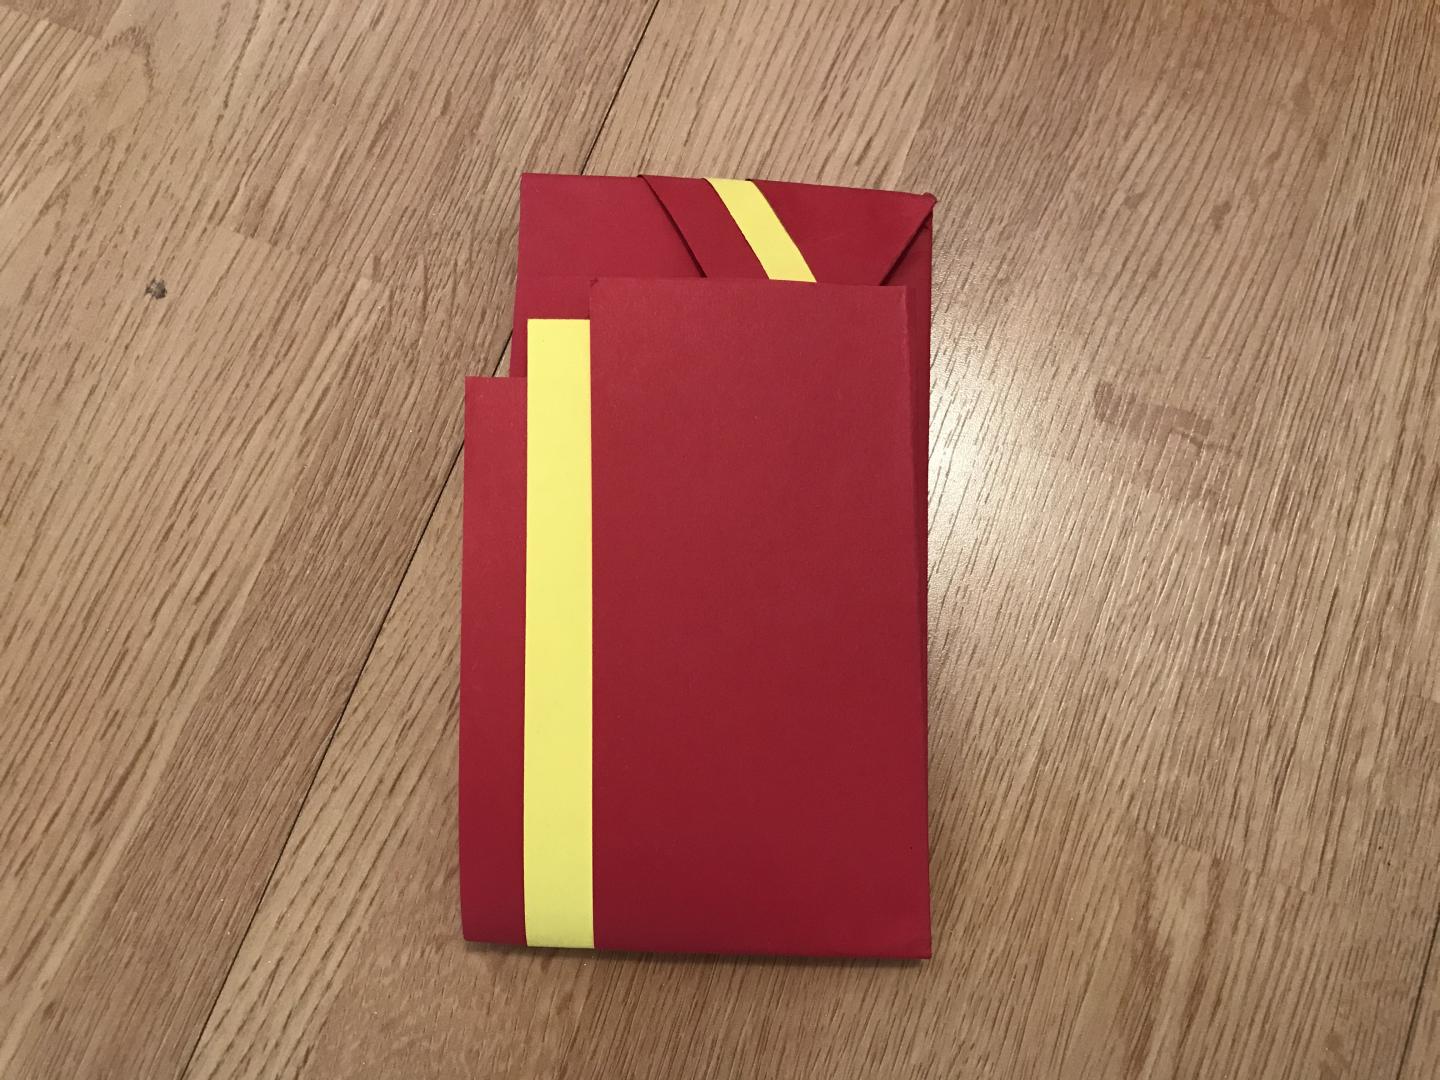 The short edge is tucked into the opening at the other end to create an envelope